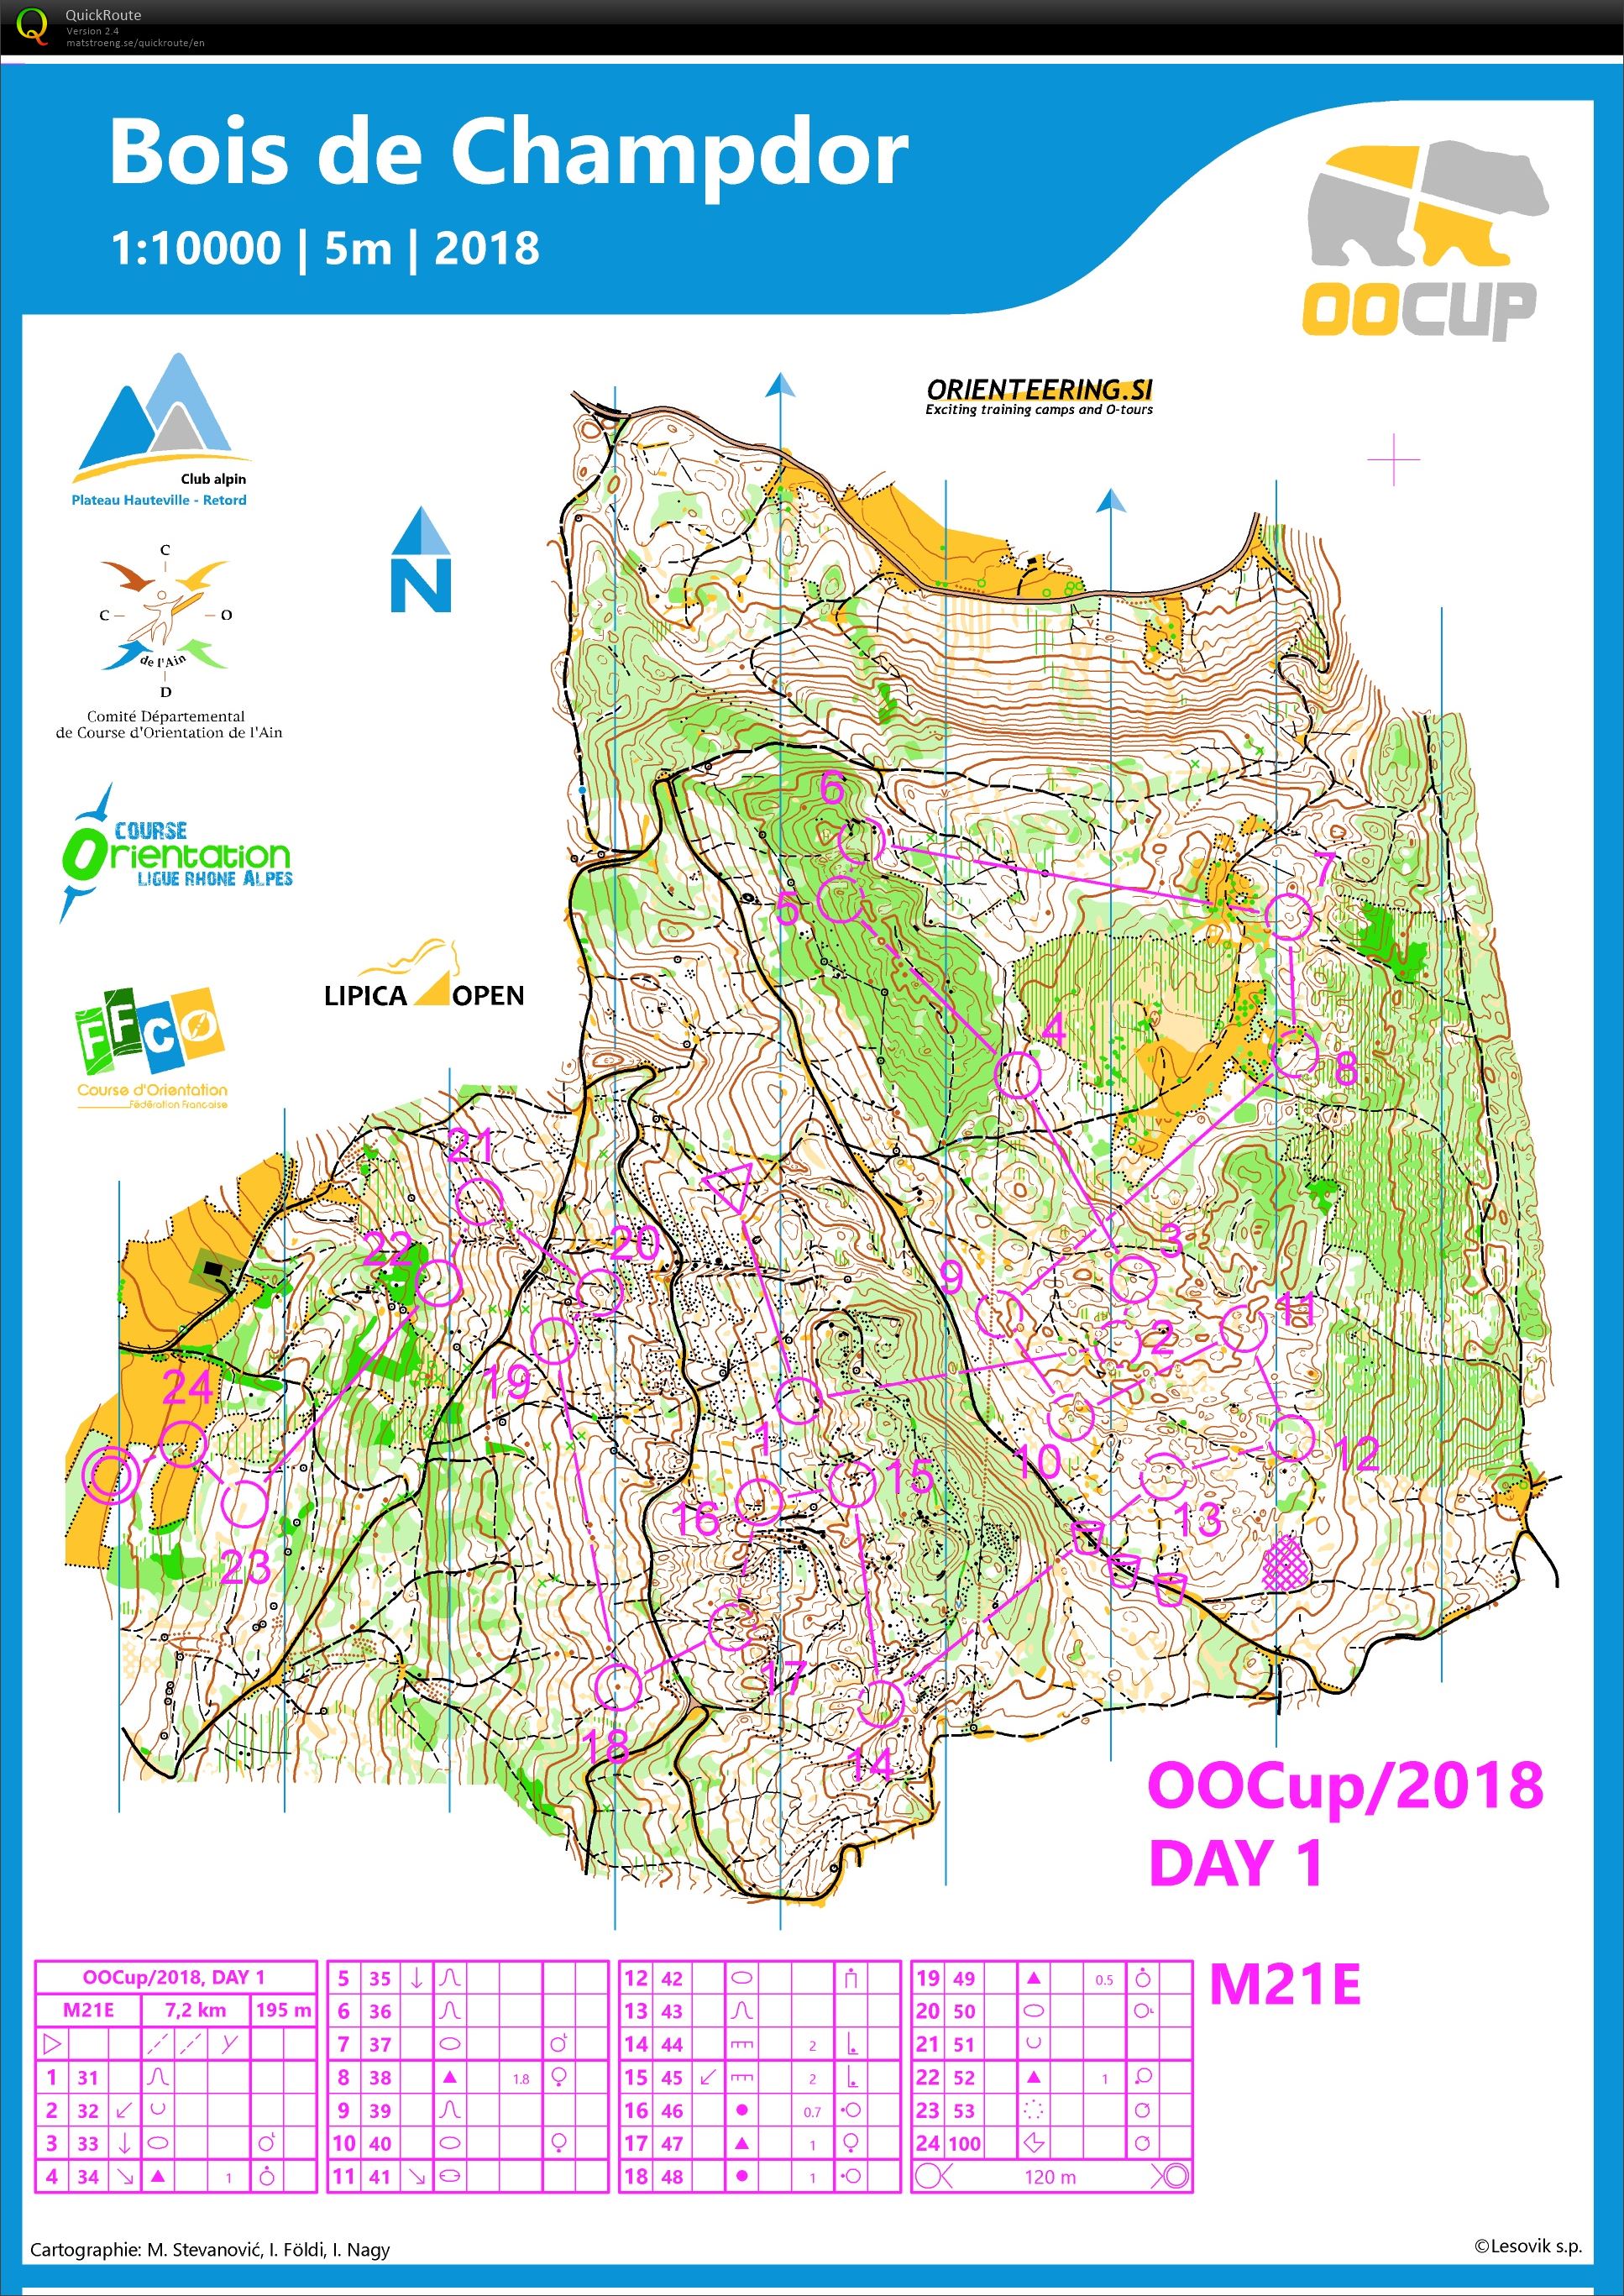 OOCup Stage 1 (25-07-2018)